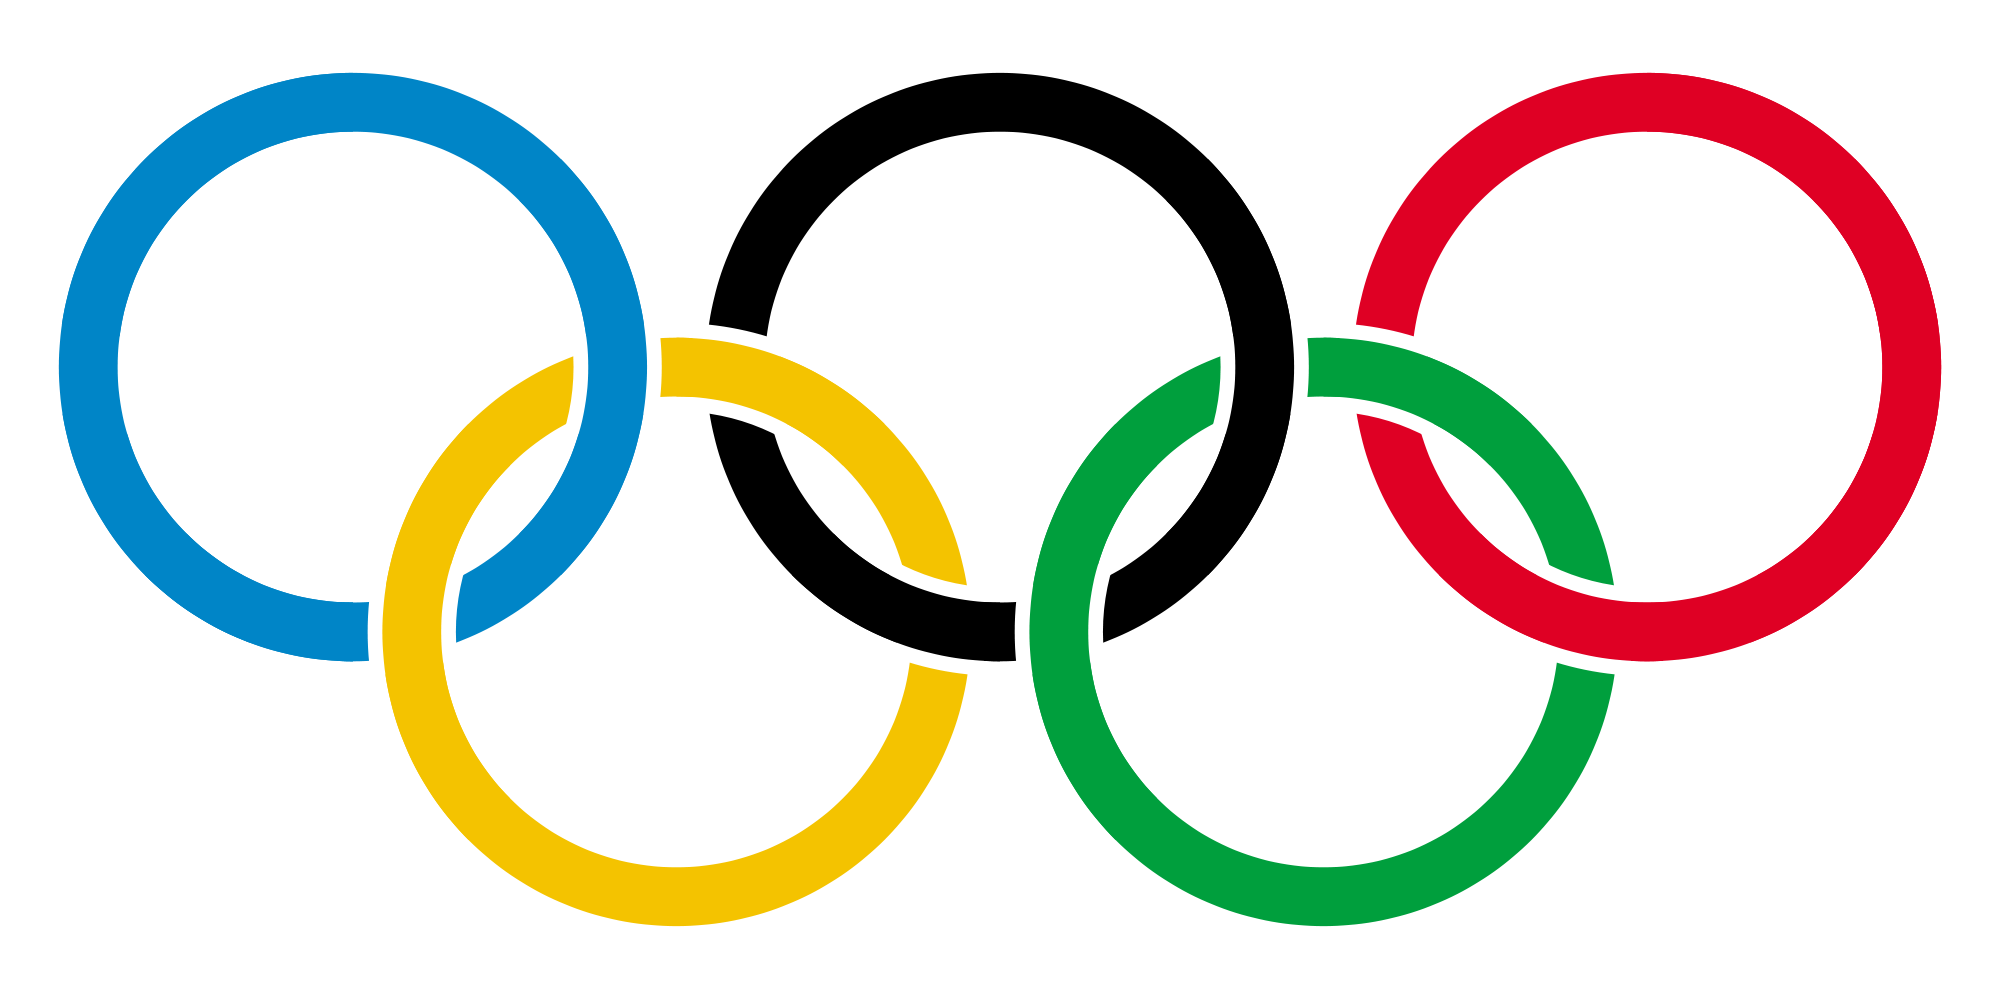 45 Olympic Logos and Symbols From 1924 to 2020 - Colorlib